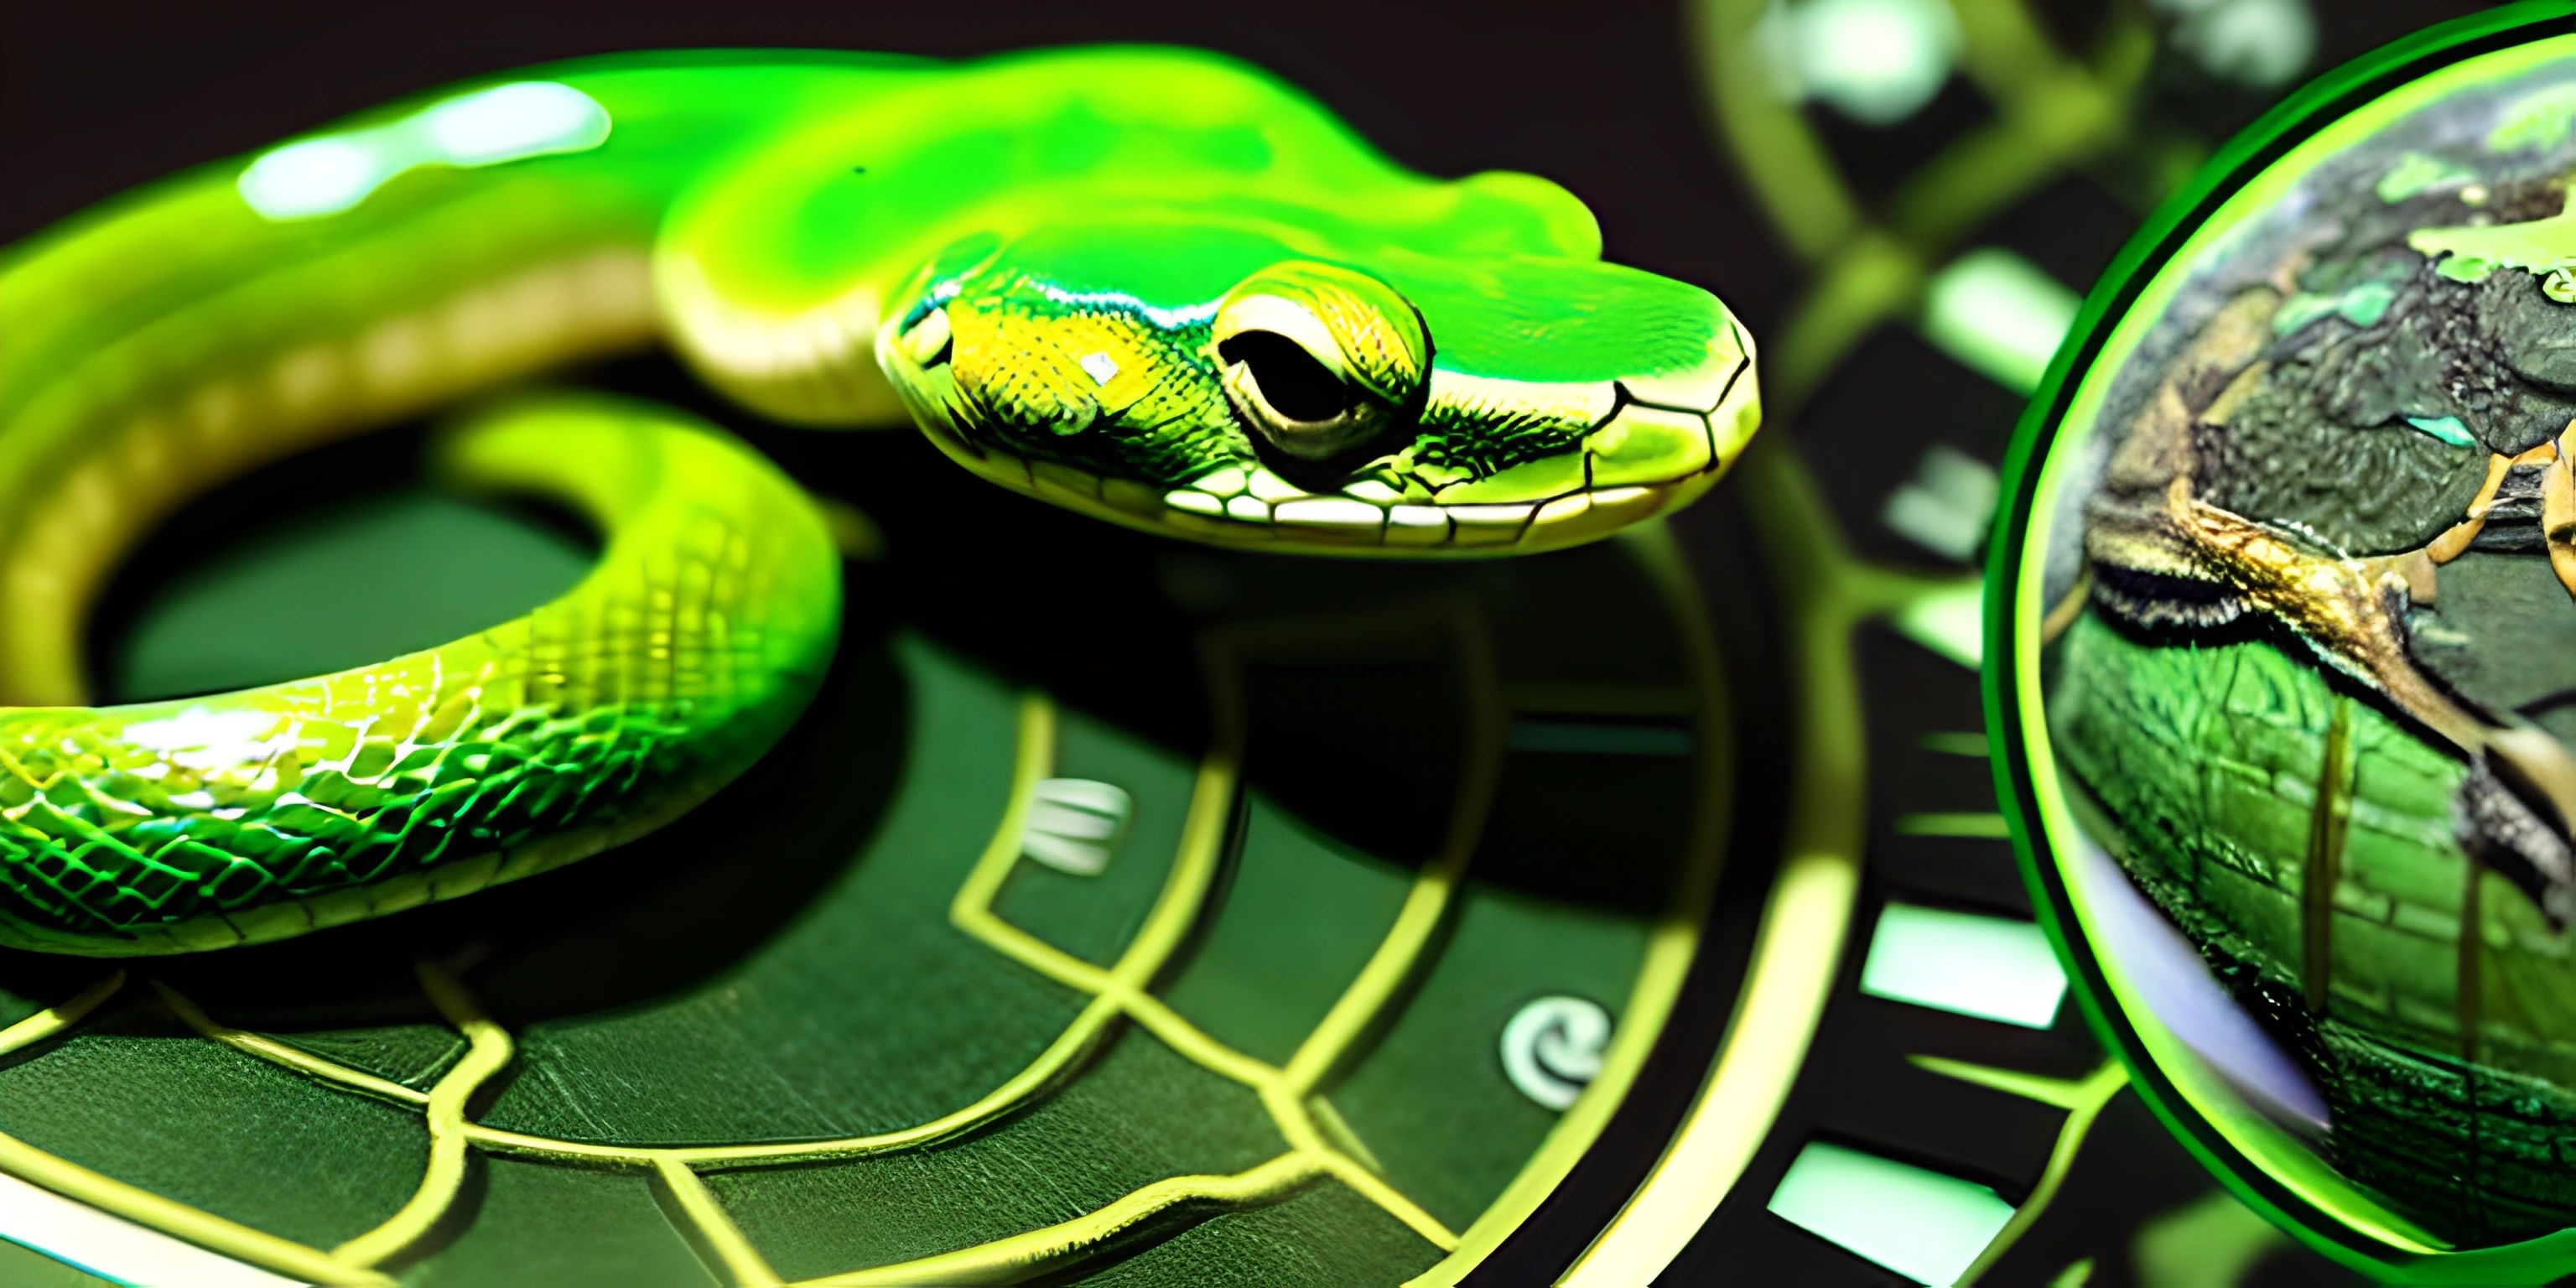 a snake on the side and an image of the snake on the other side of the clock